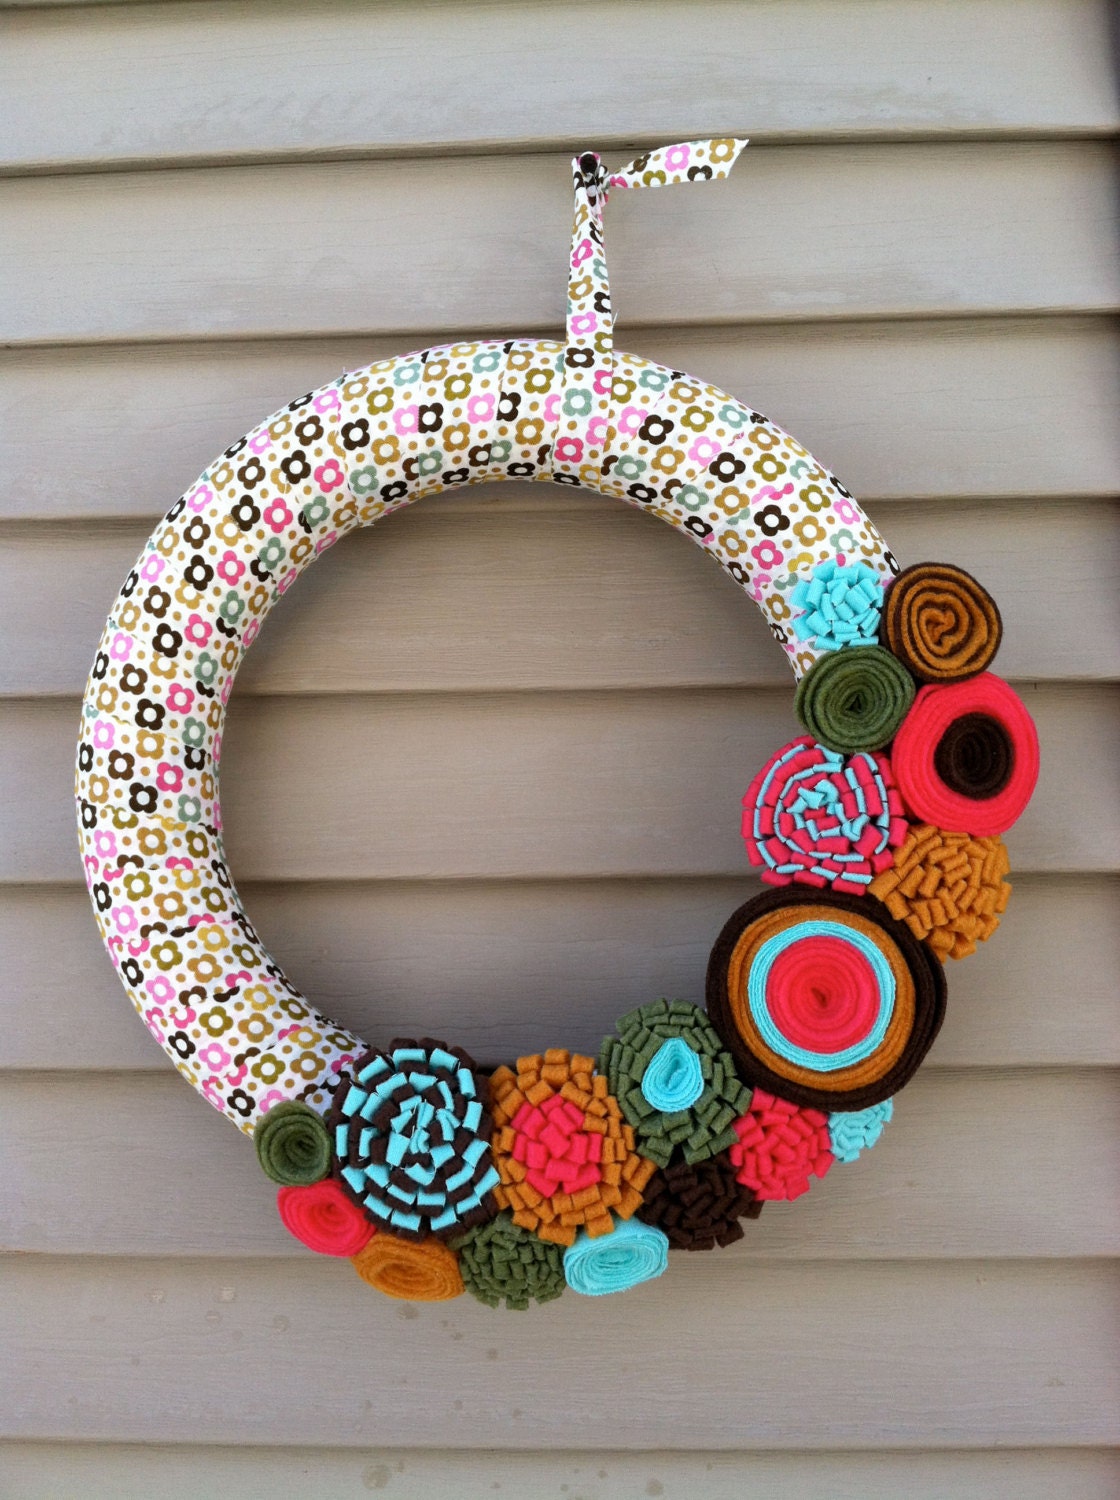 Spring Wreath - Modern Flower Patterned Fabric Decorated with Felt Flowers. Easter Wreath - Flower Wreath - Fabric Wreath